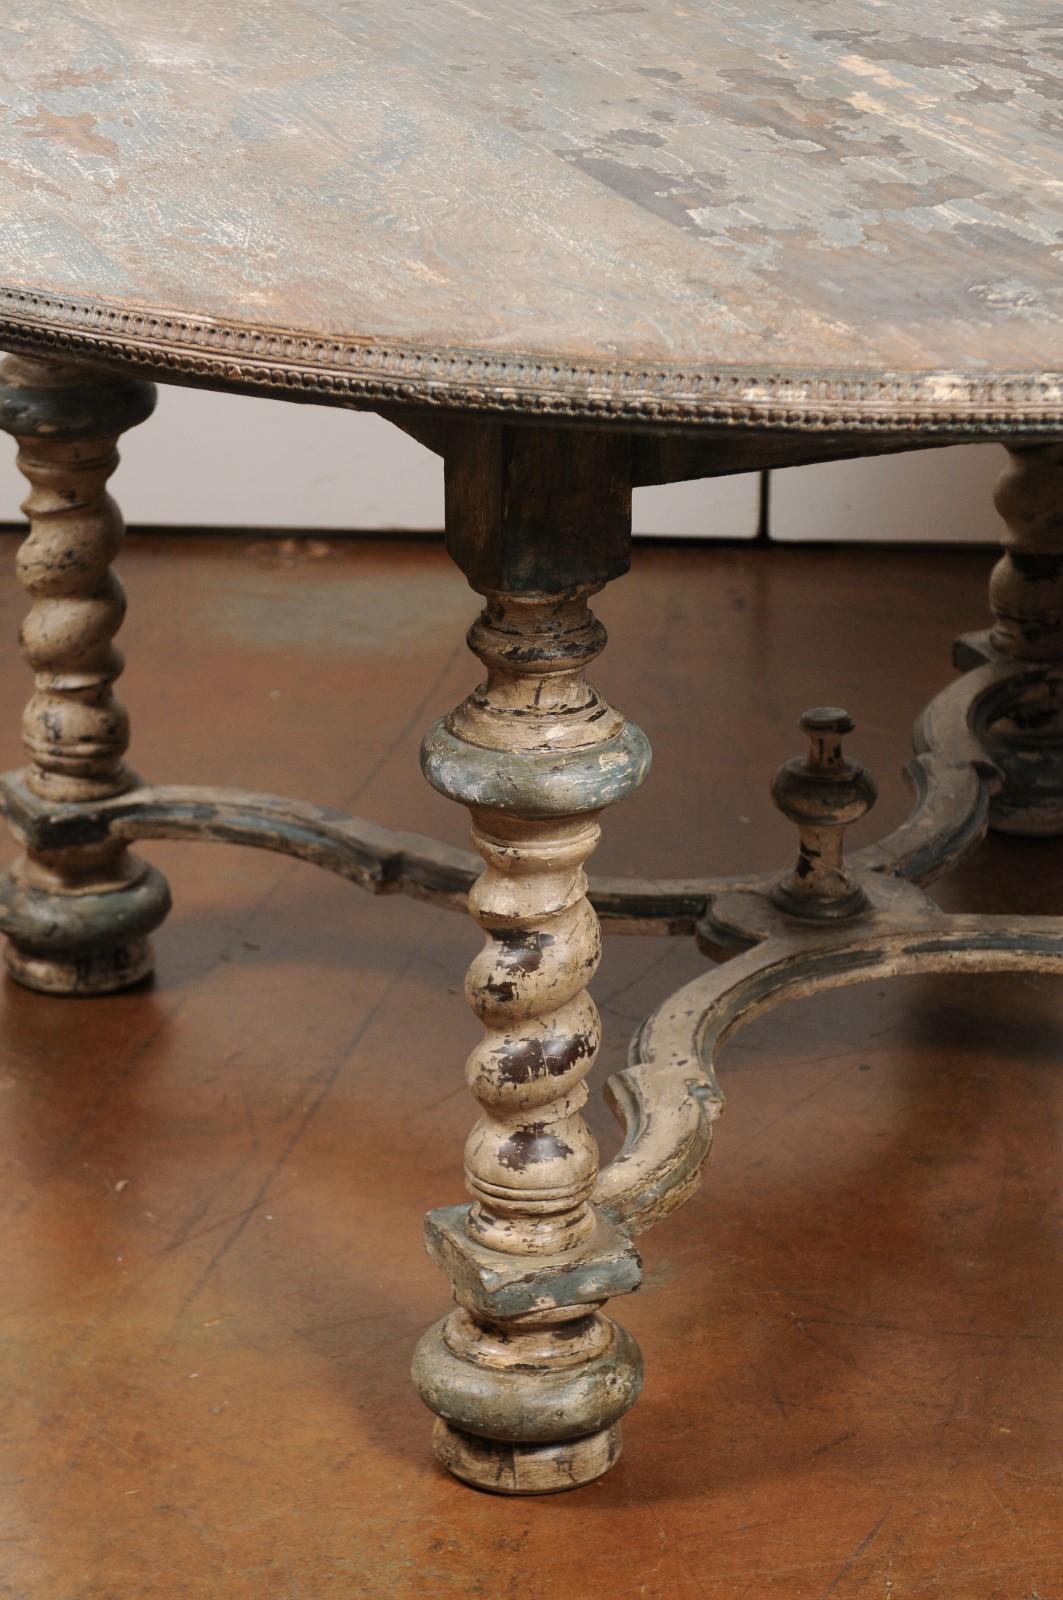 Painted Italian Baroque Style Dining Room Table with Barley Twist Legs and Stretcher